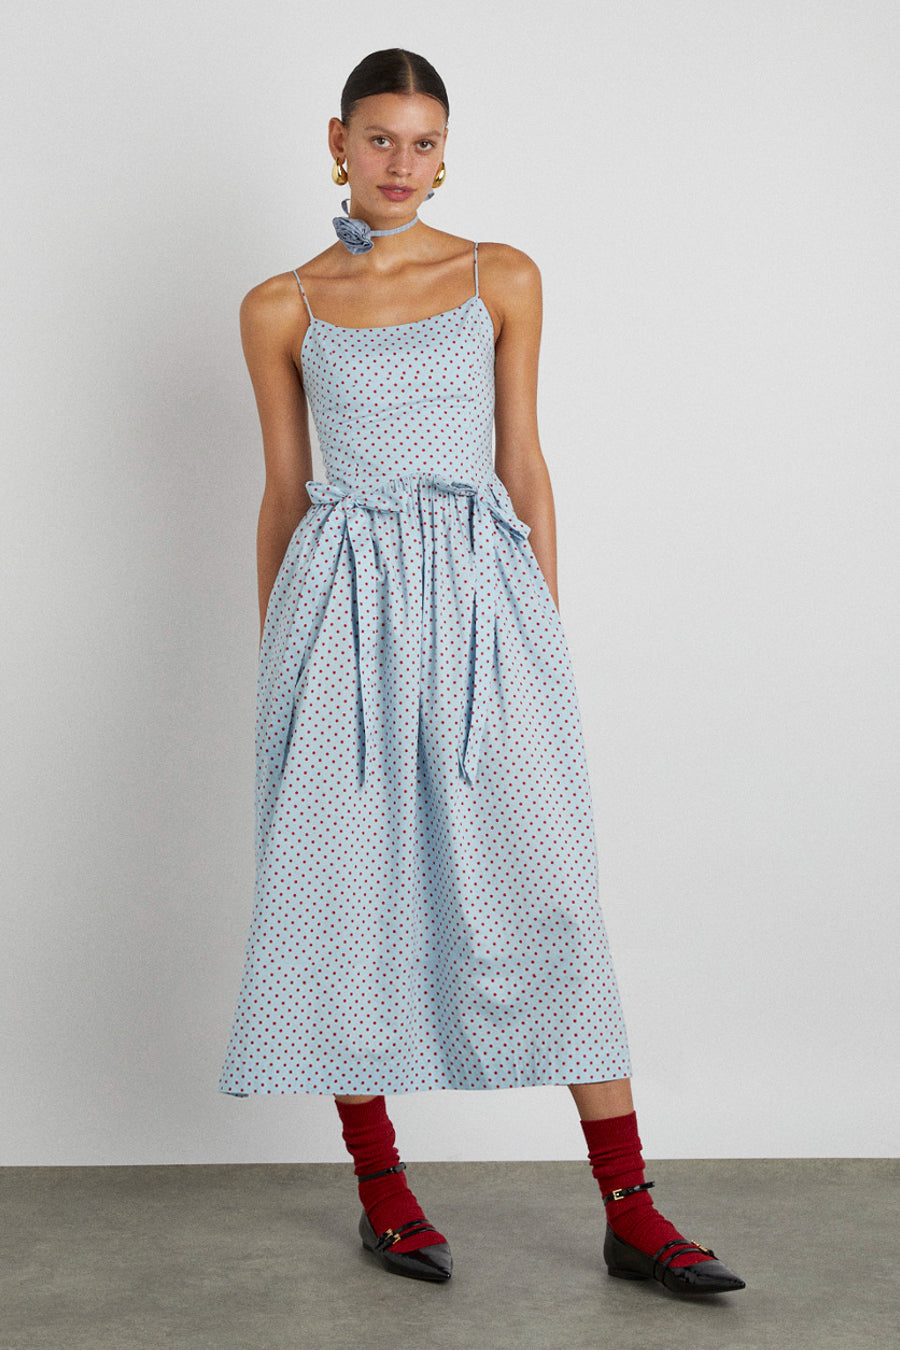 The Damson madder Penelope apron dress is our light blue and red polka dot midi dress featuring a corset style bodice with waist seam details and bows that gather into a fuller skirt.    